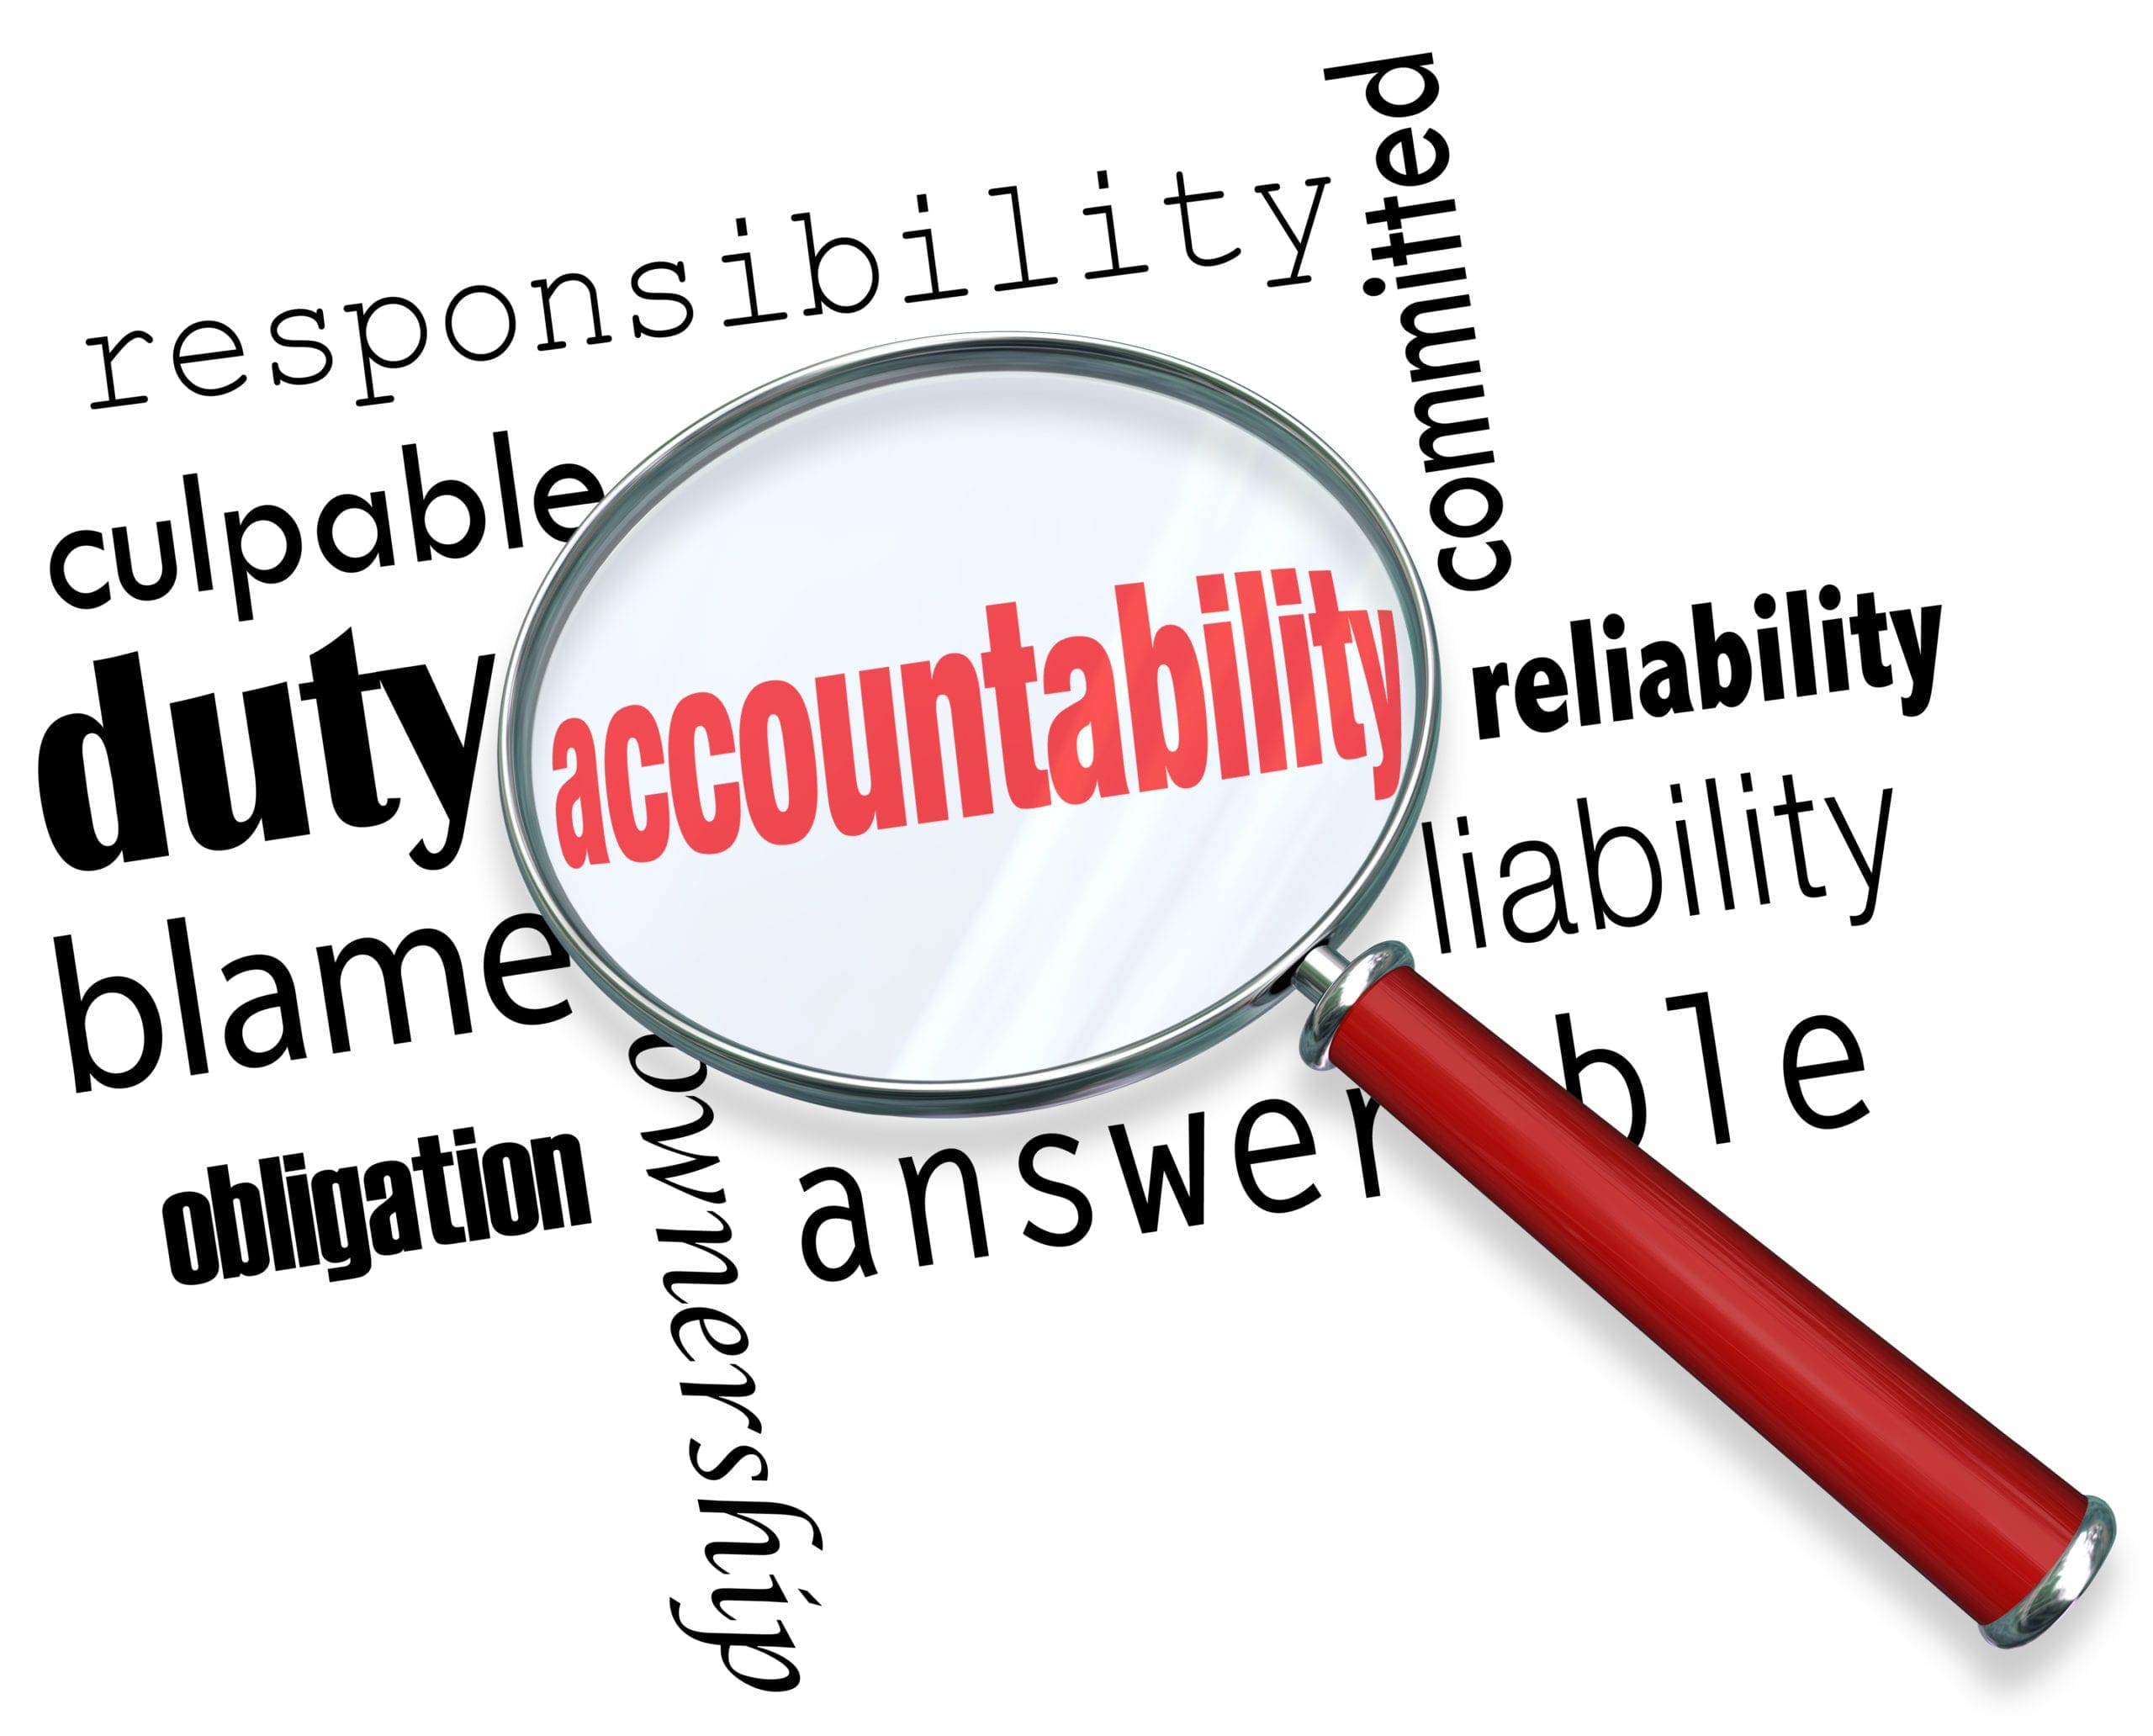 Accountability in the workplace – a lost cause or a real opportunity?